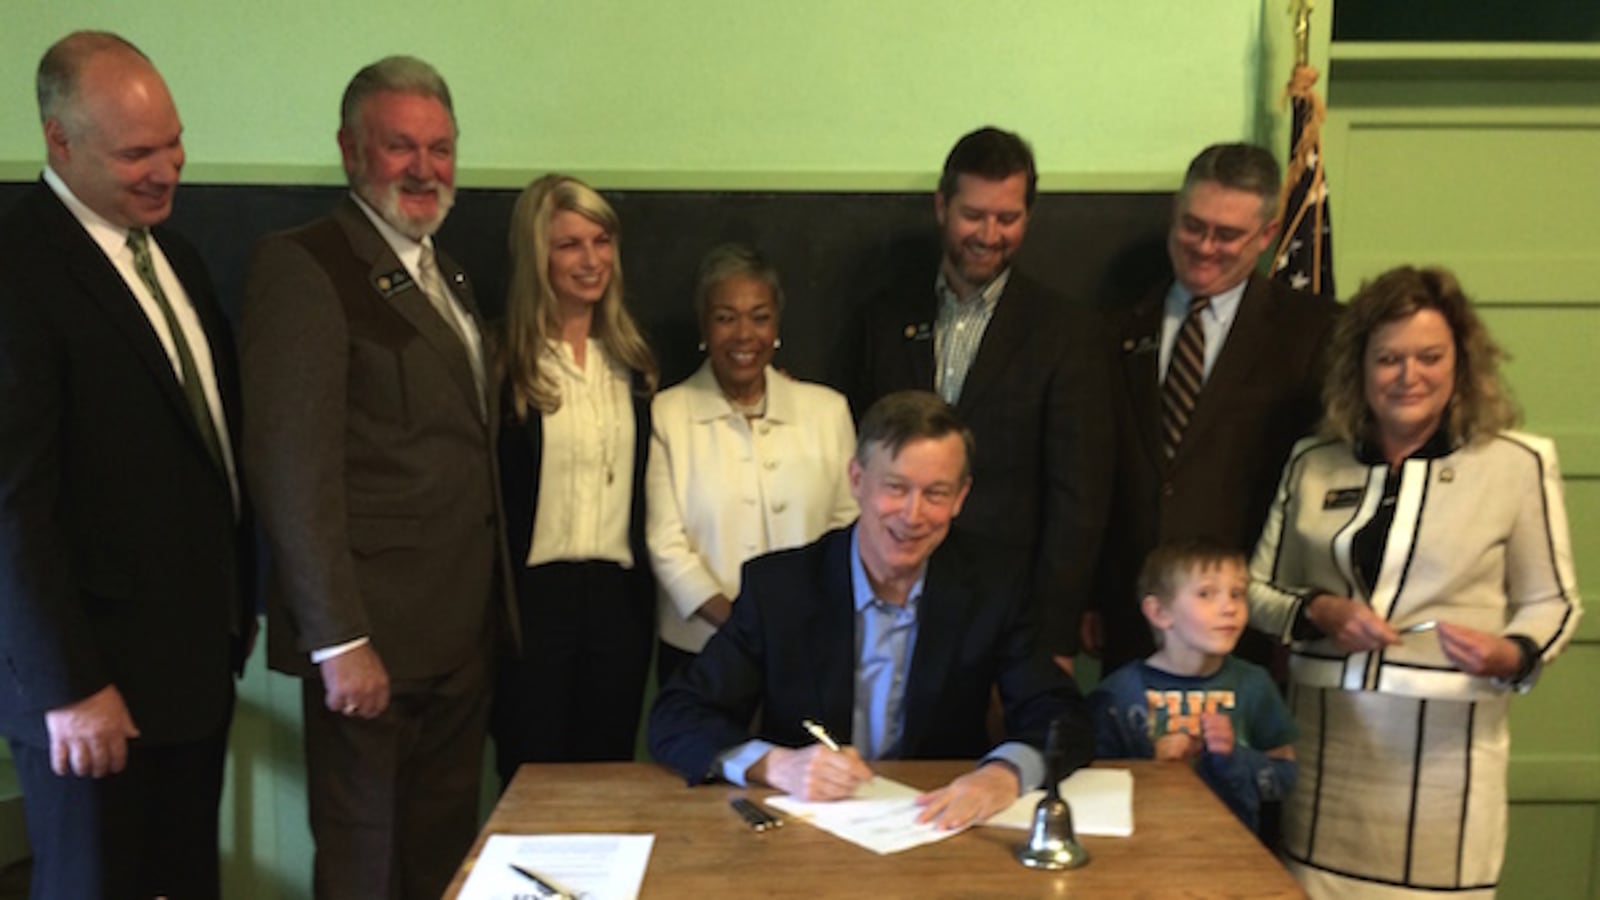 Gov. John Hickenlooper signs a test bill flanked (L-R) by Reps. Kevin Priola, Jim Wilson, Brittany Pettersen, Janet Buckner (wife of Rep. John Buckner), Sens. Andy Kerr and Chris Holbert and Rep. Tracy Kraft-Tharp. Kerr's son Griffin mugs for the cameras.